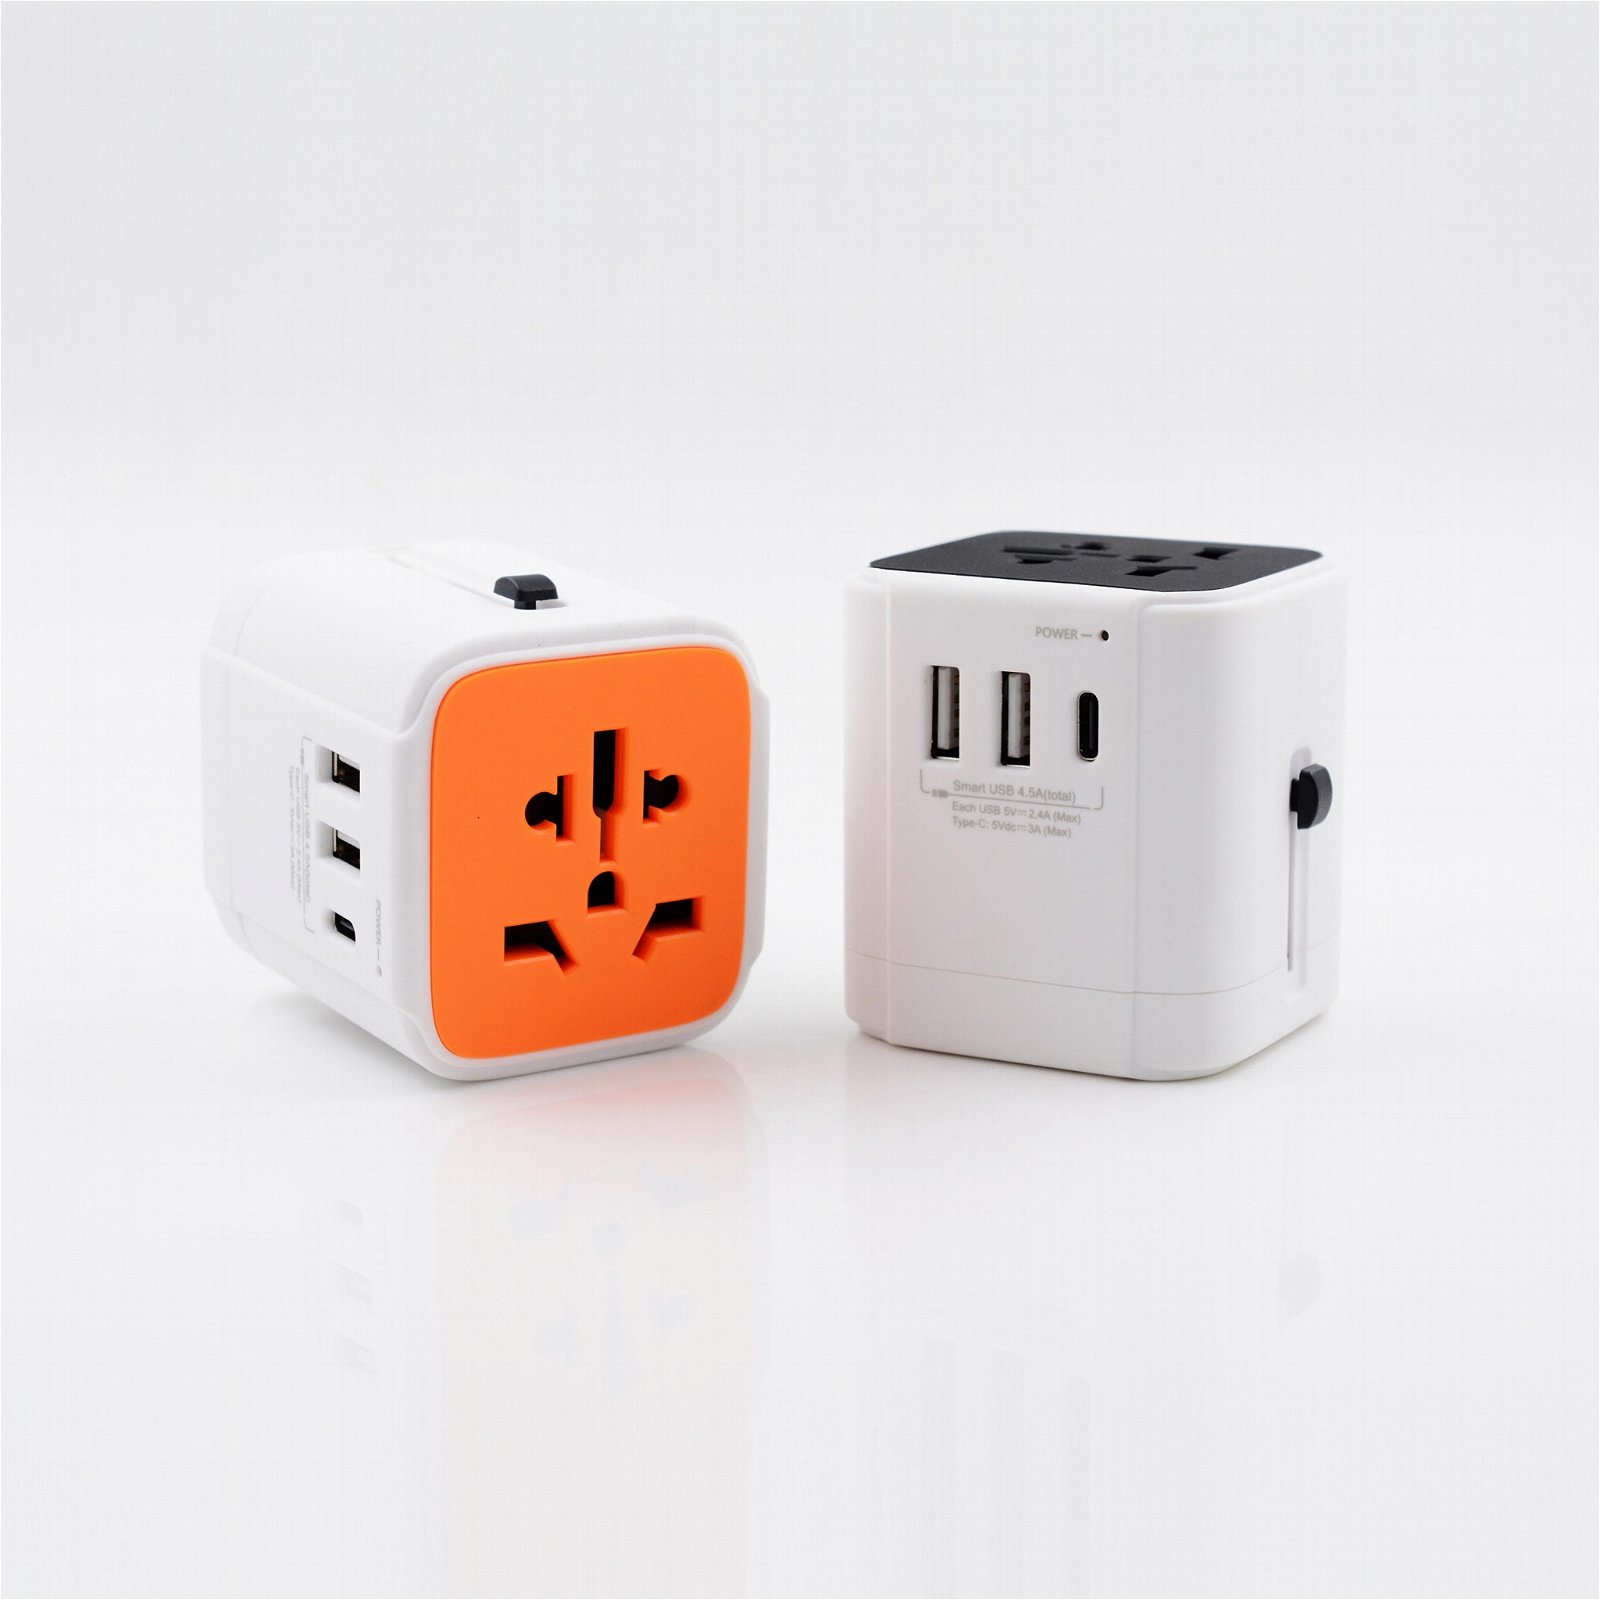 2019 gift promotion travel adapter with Taye C USB 4.5A plug adapter 